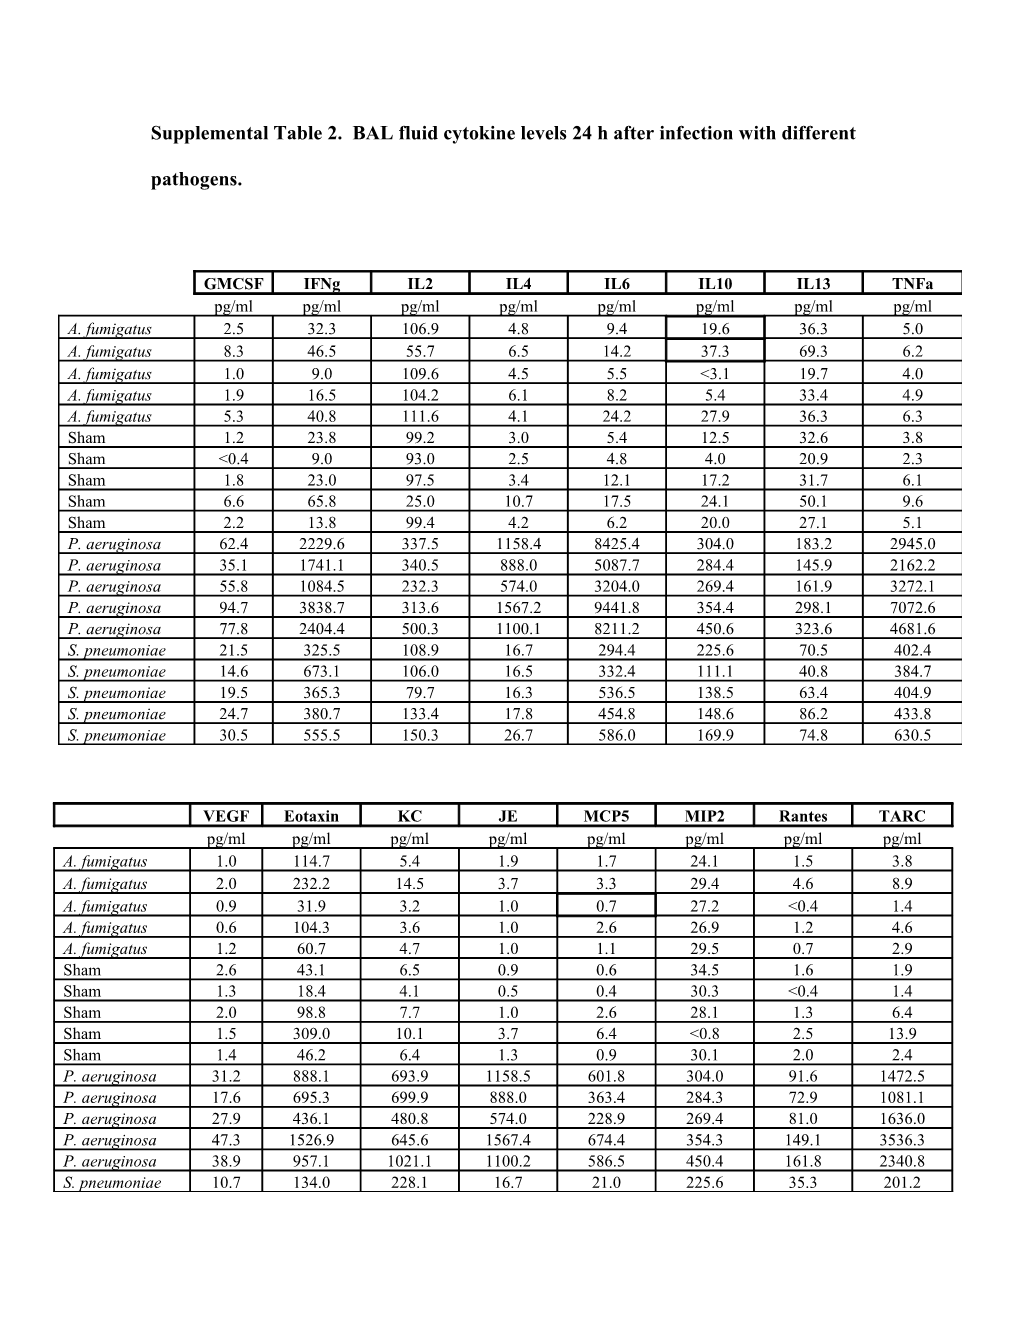 Supplemental Table 2. BAL Fluid Cytokine Levels 24 H After Infection with Different Pathogens